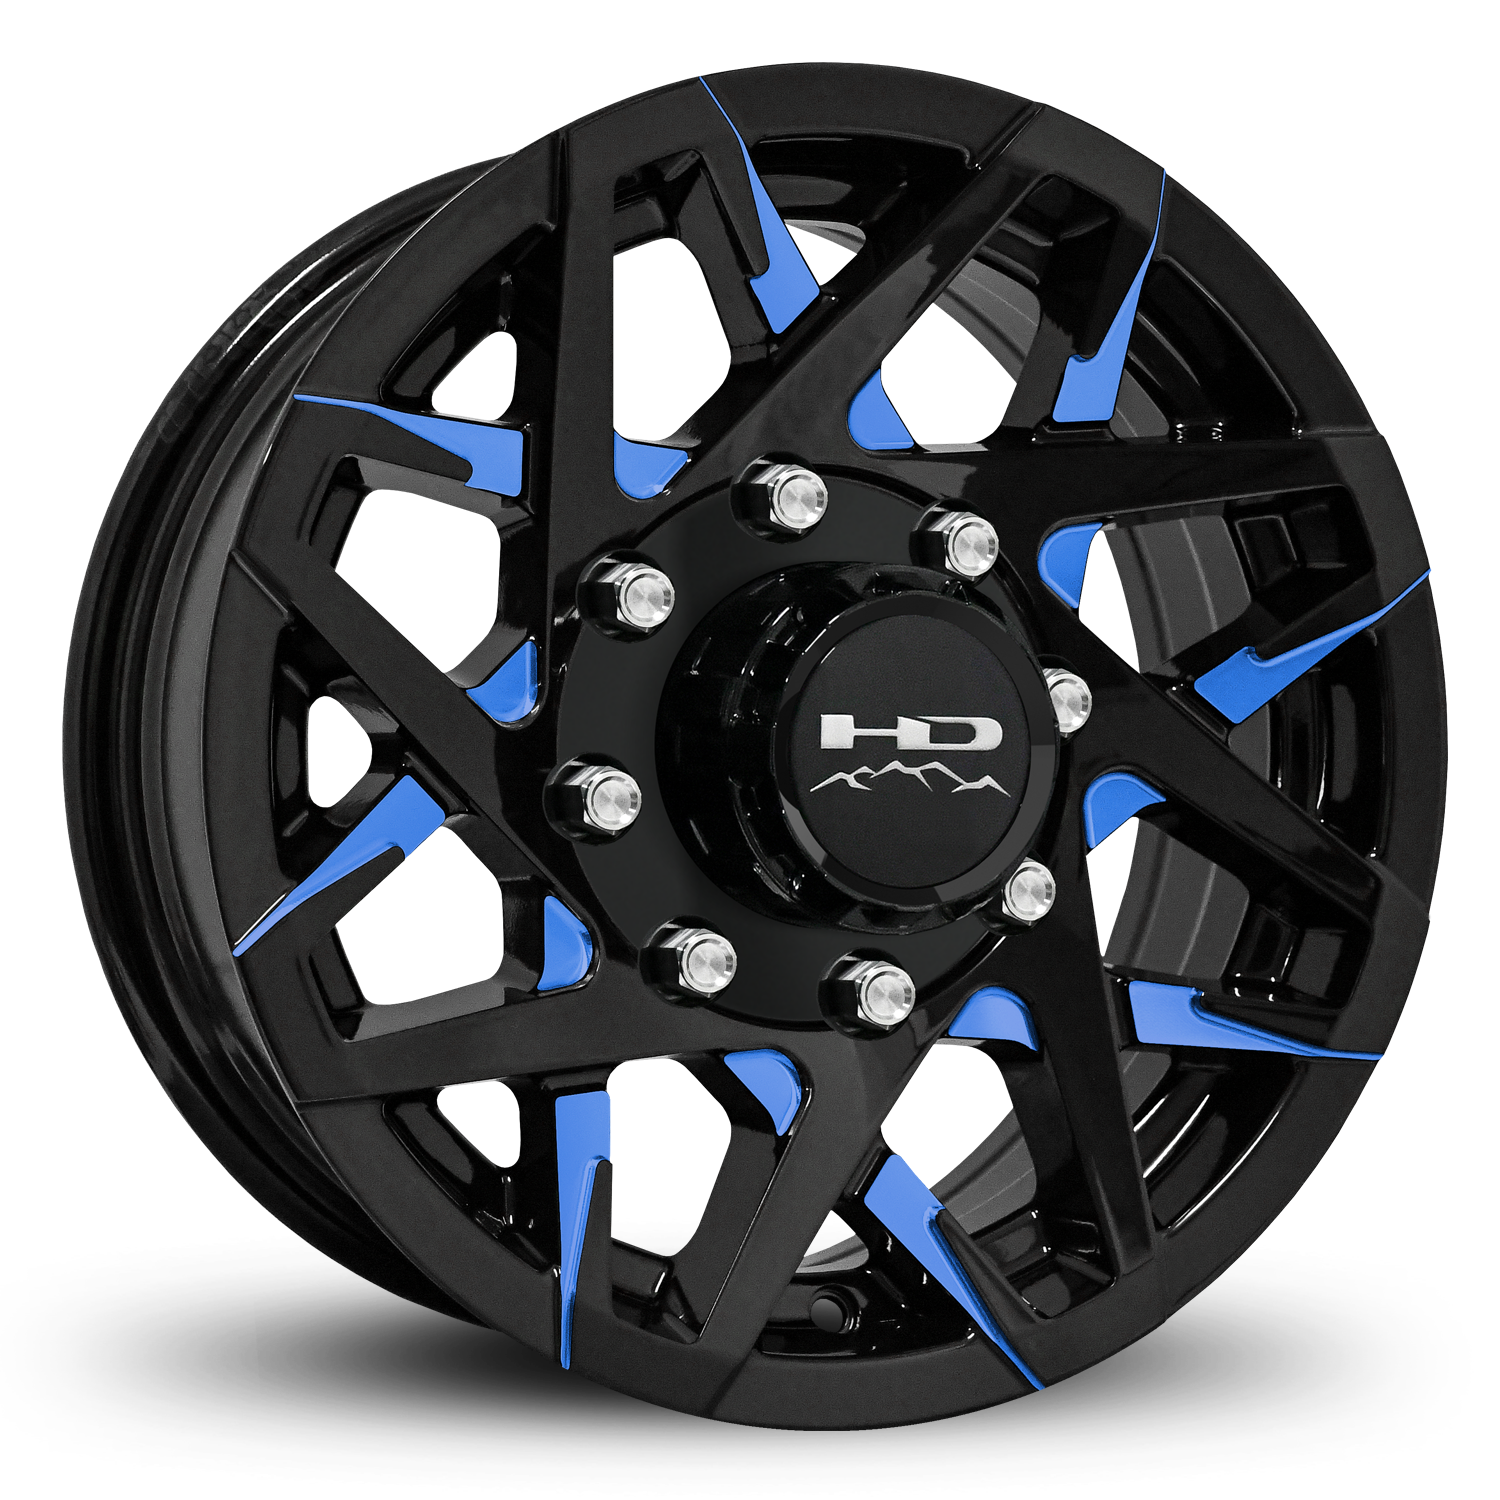 HD Off-Road Canyon Blue Custom Trailer Wheel Rims in 16x6.0 16x6 Gloss Black CNC Milled Face Spokes with Center Cap & Logo fits 8x6.50 / 8x165 Axle Boat, Car, RV, Travel, Concession, Horse, Utility, Lawn & Garden, & Landscaping.